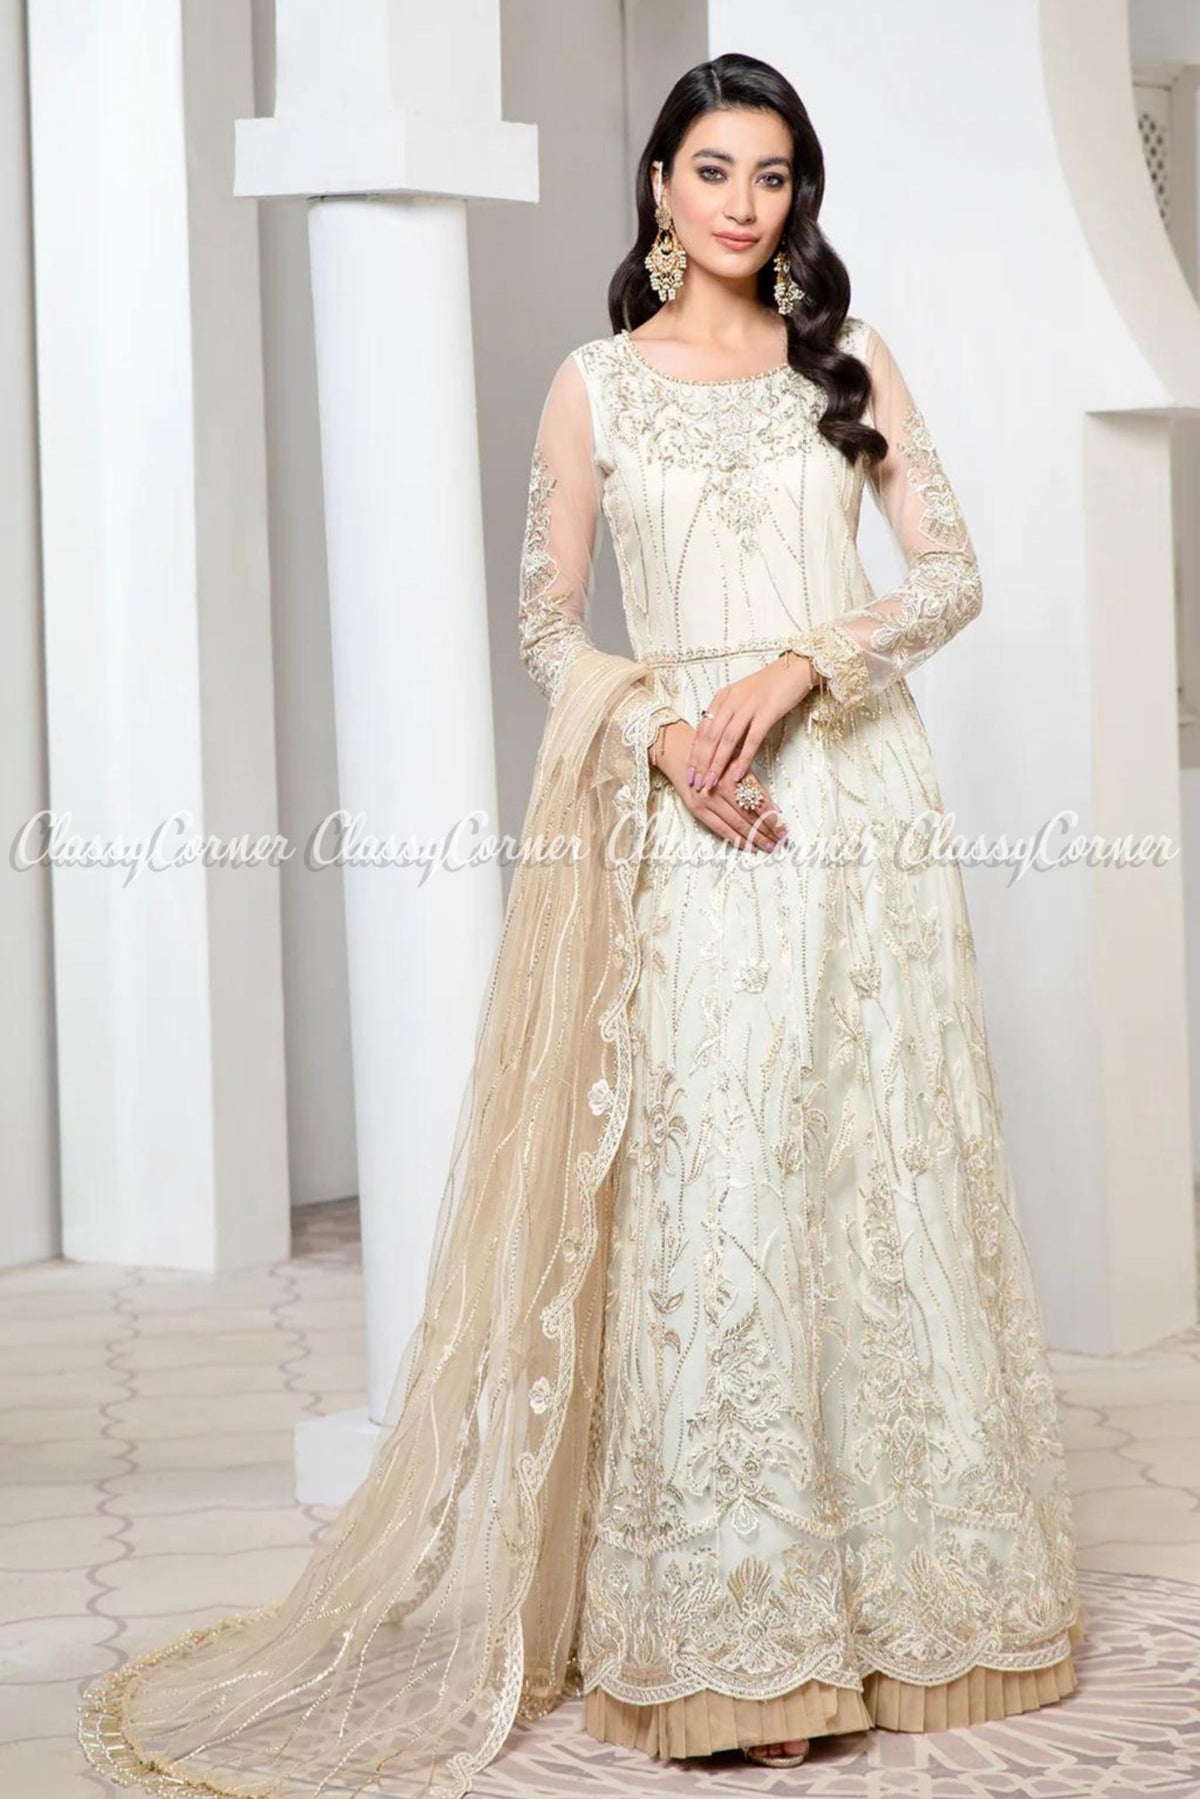 Cream White Beige Net Embroidered Party Wear Gown Outfits - Classy Corner